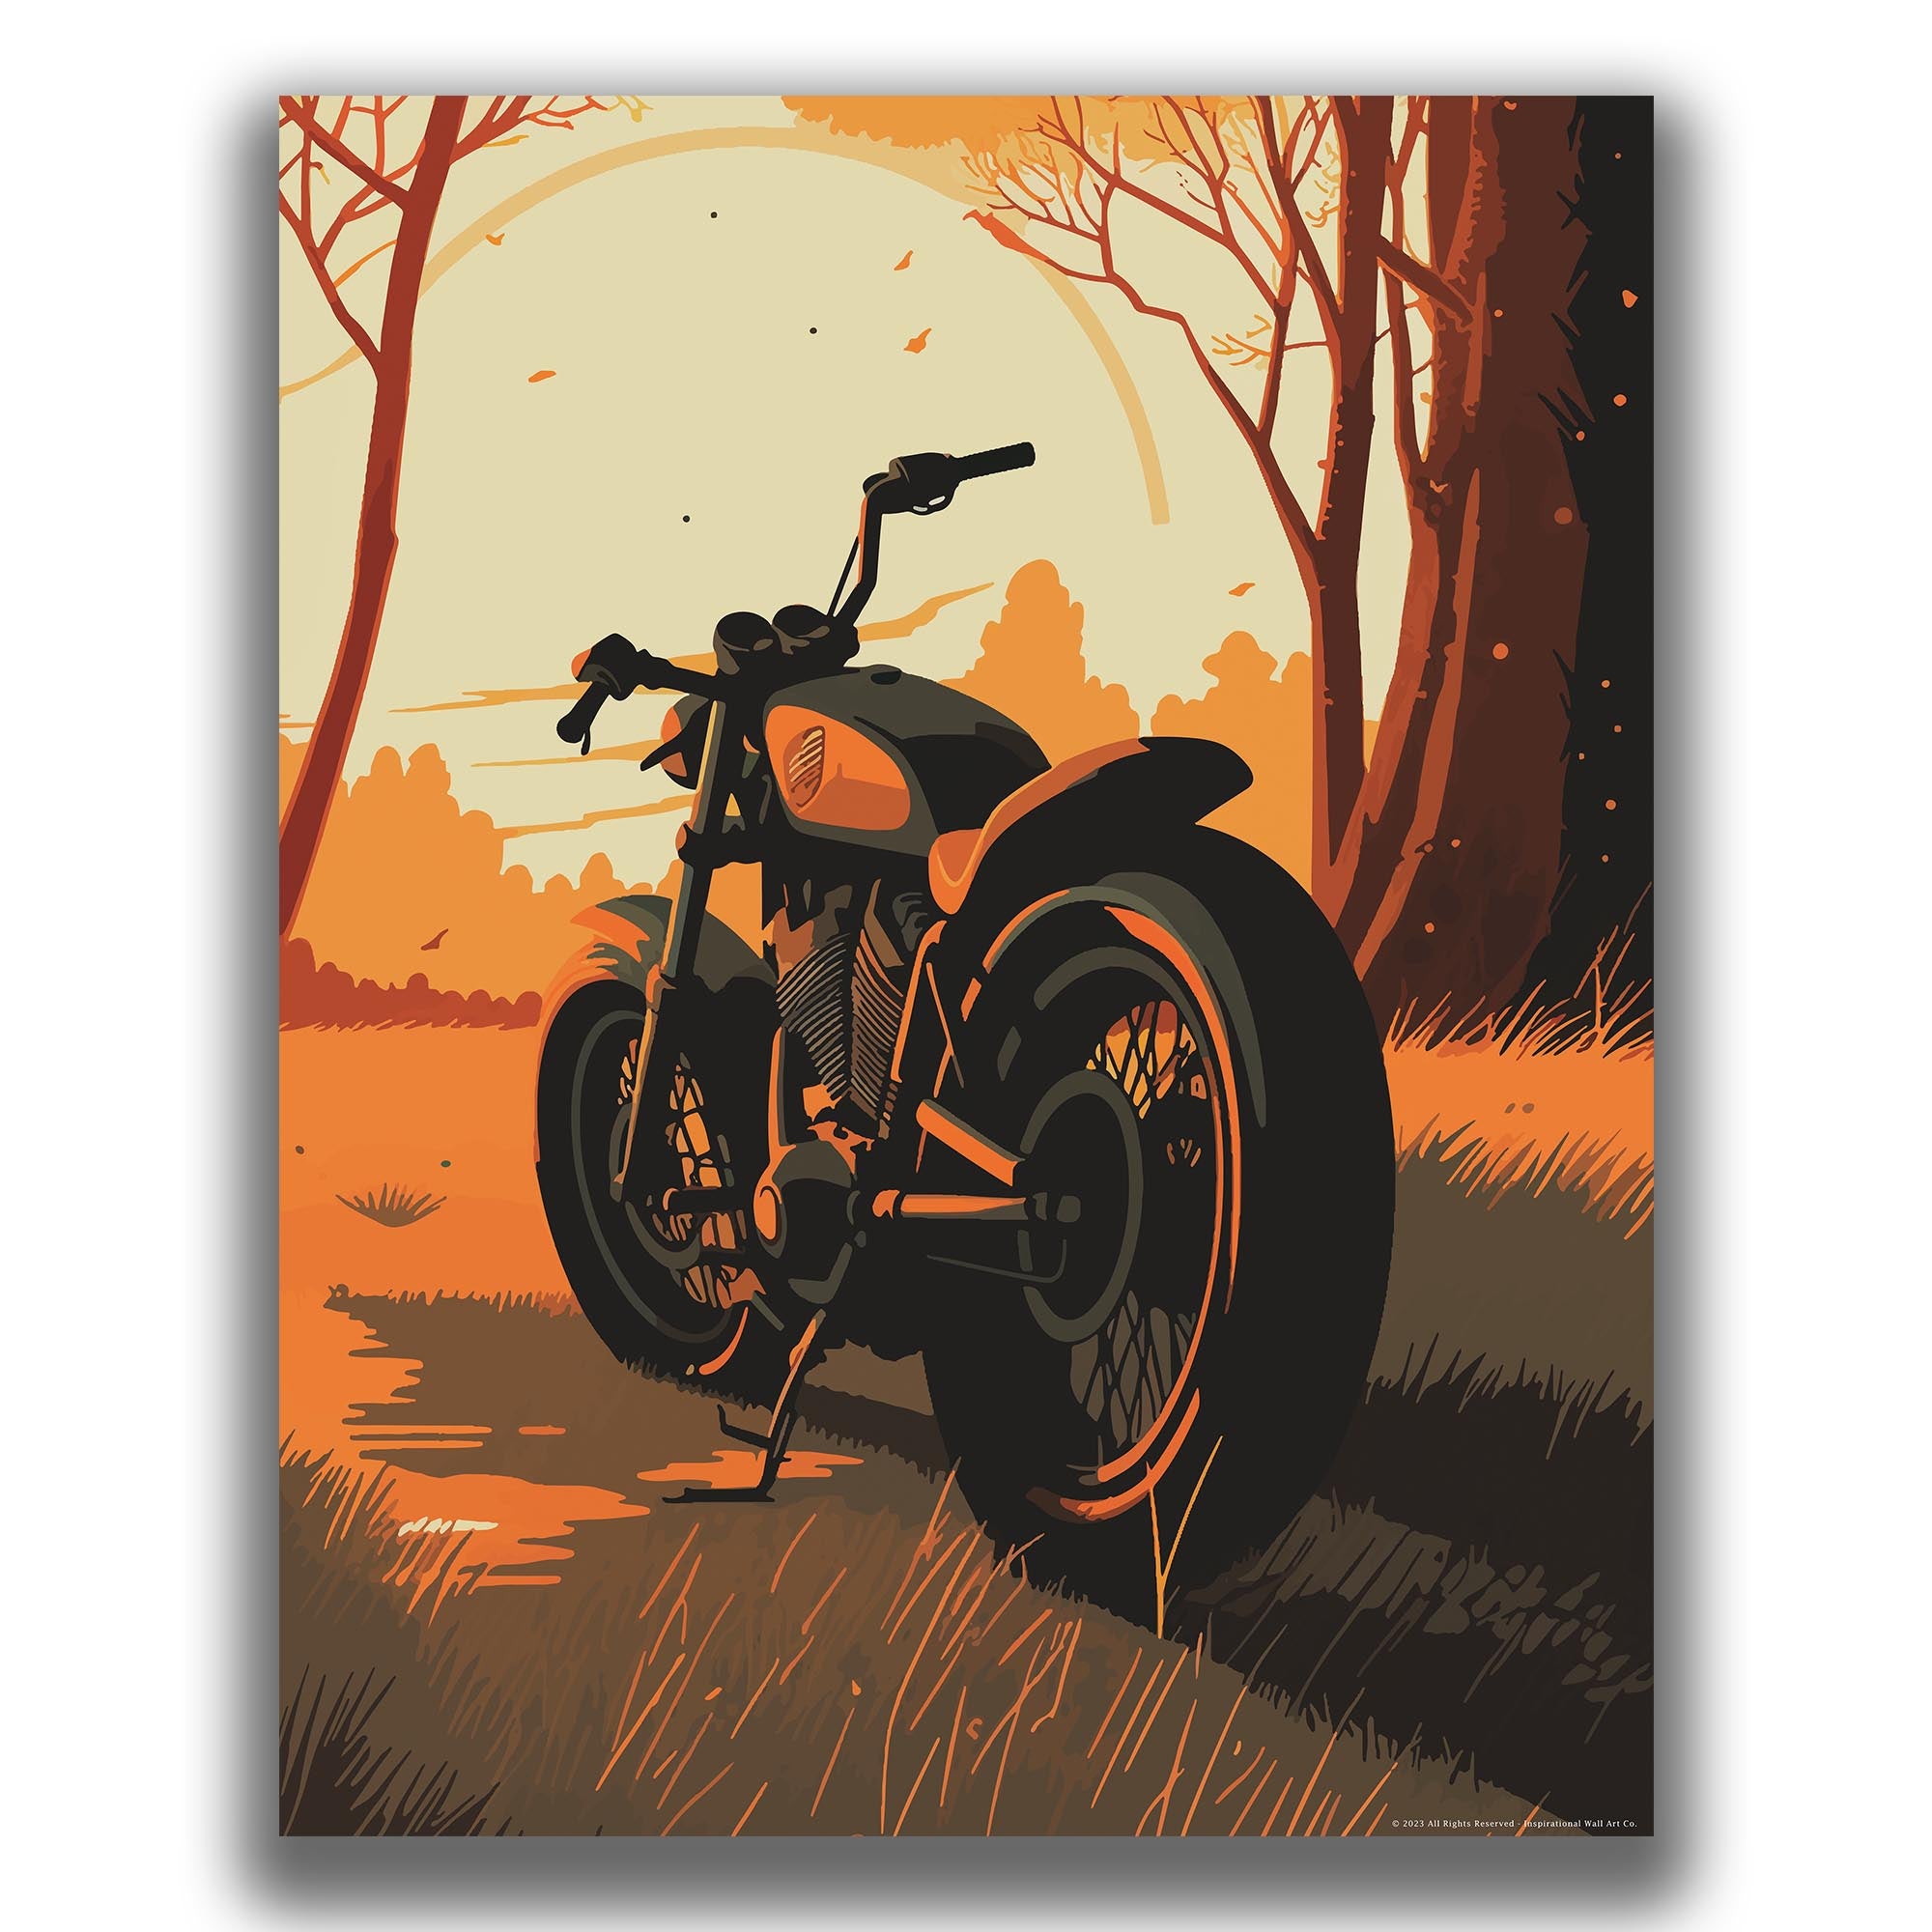 Born to Ride - Motorcycle Poster